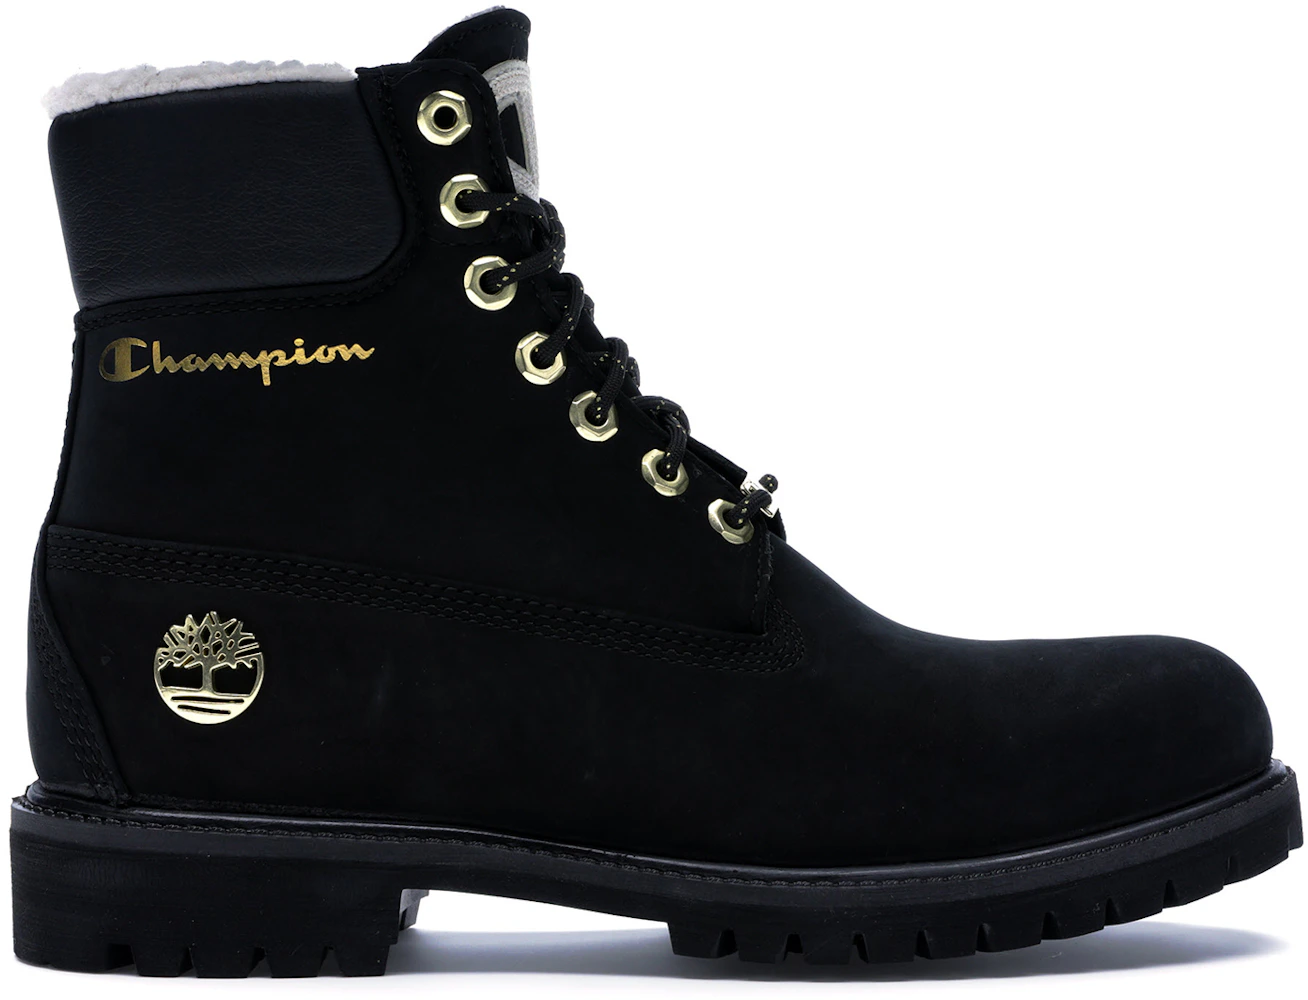 Timberland Shearling Boot Champion Black Men's TB0A1UD3001 -